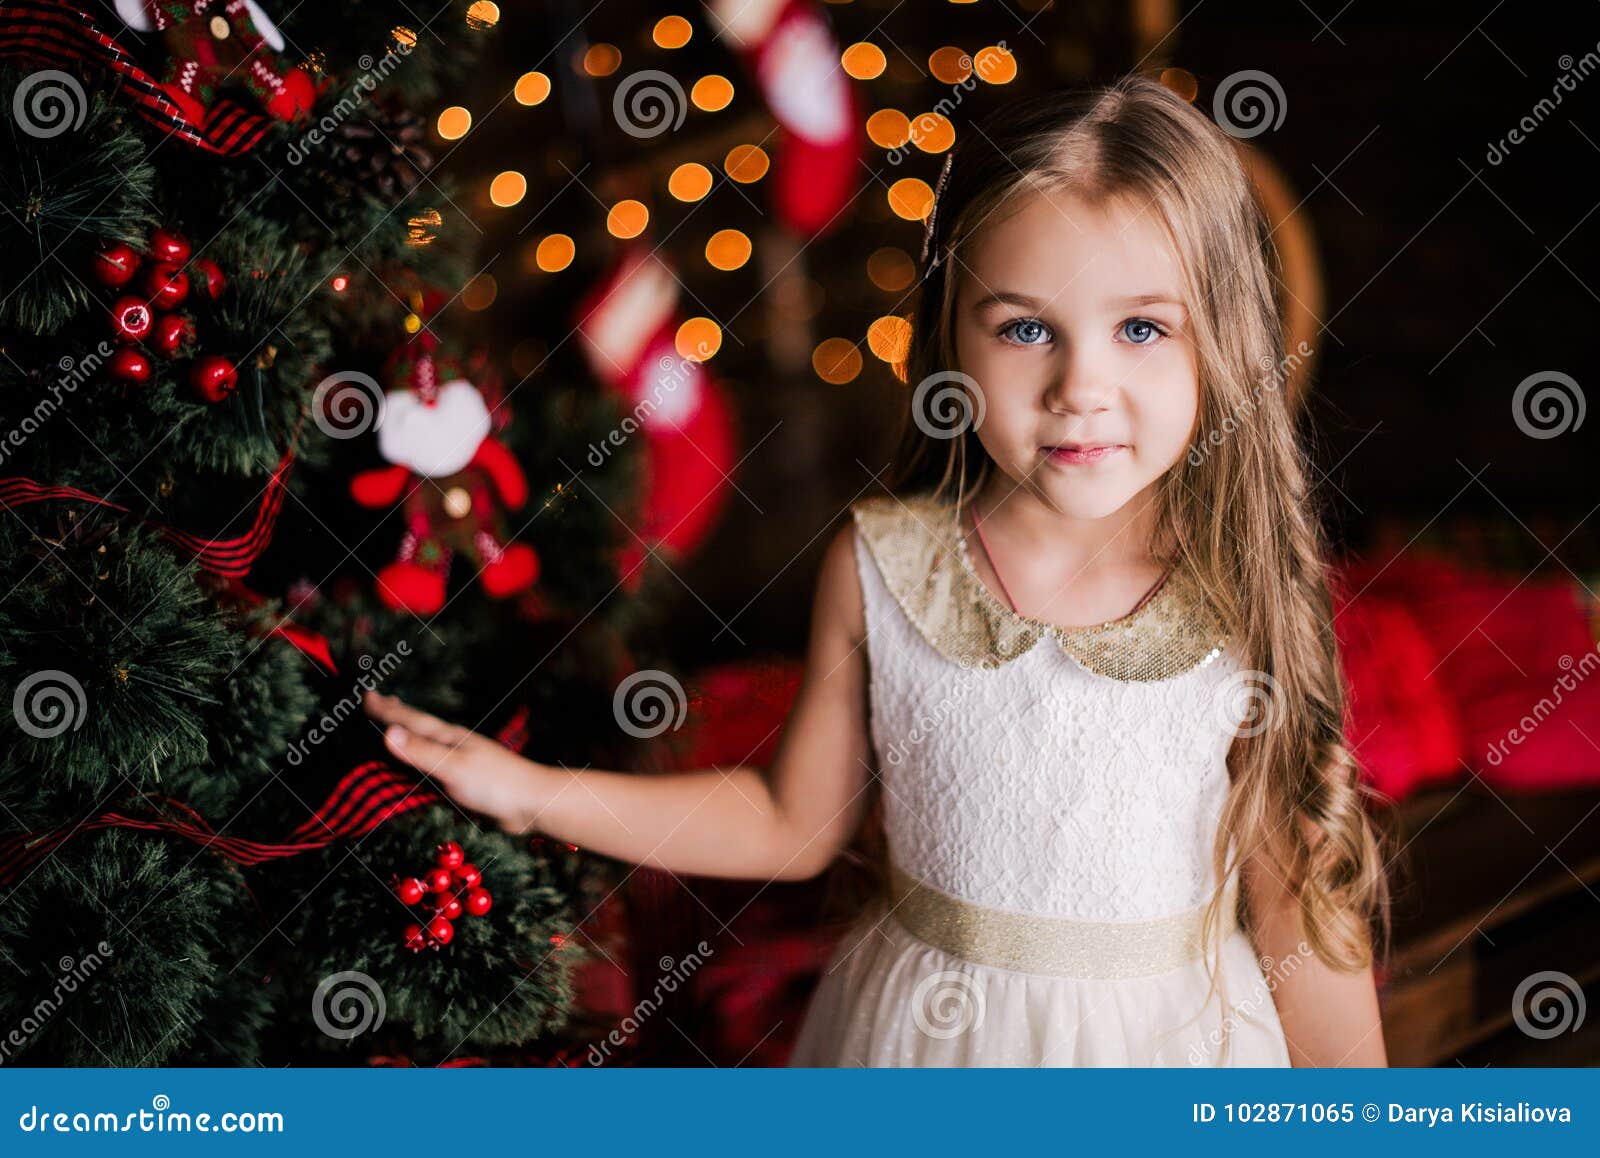 Baby Girl 4-5 Year Old Posing in Room Over Christmas Tree with ...